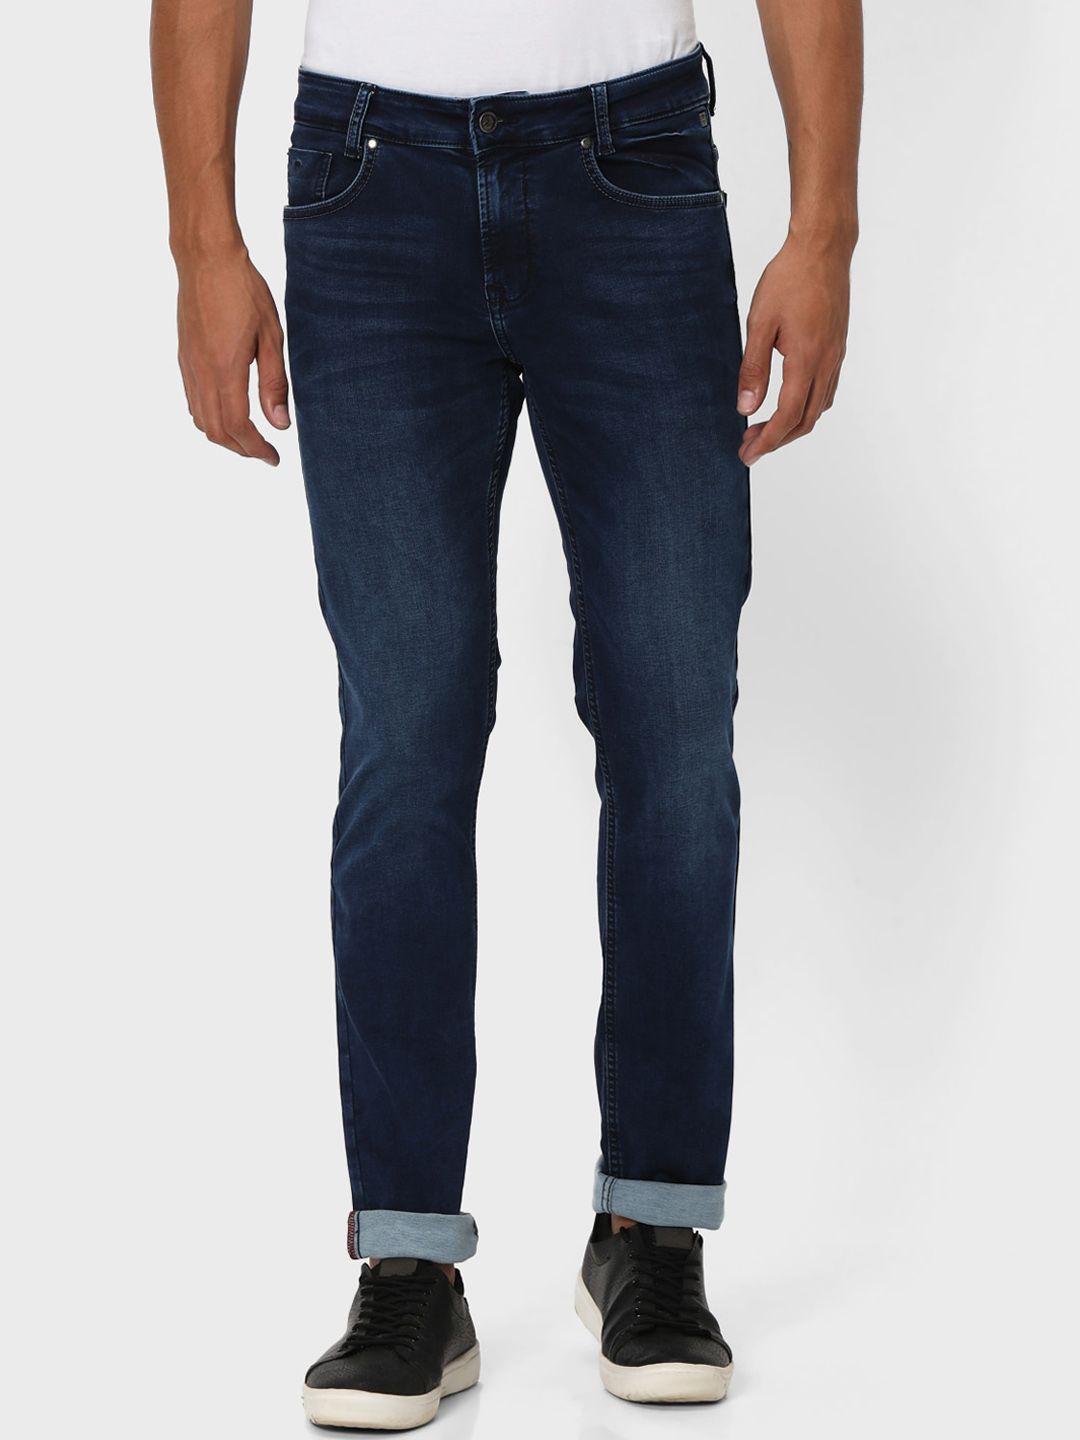 mufti-men-slim-fit-light-fade-stretchable-clean-look-jeans